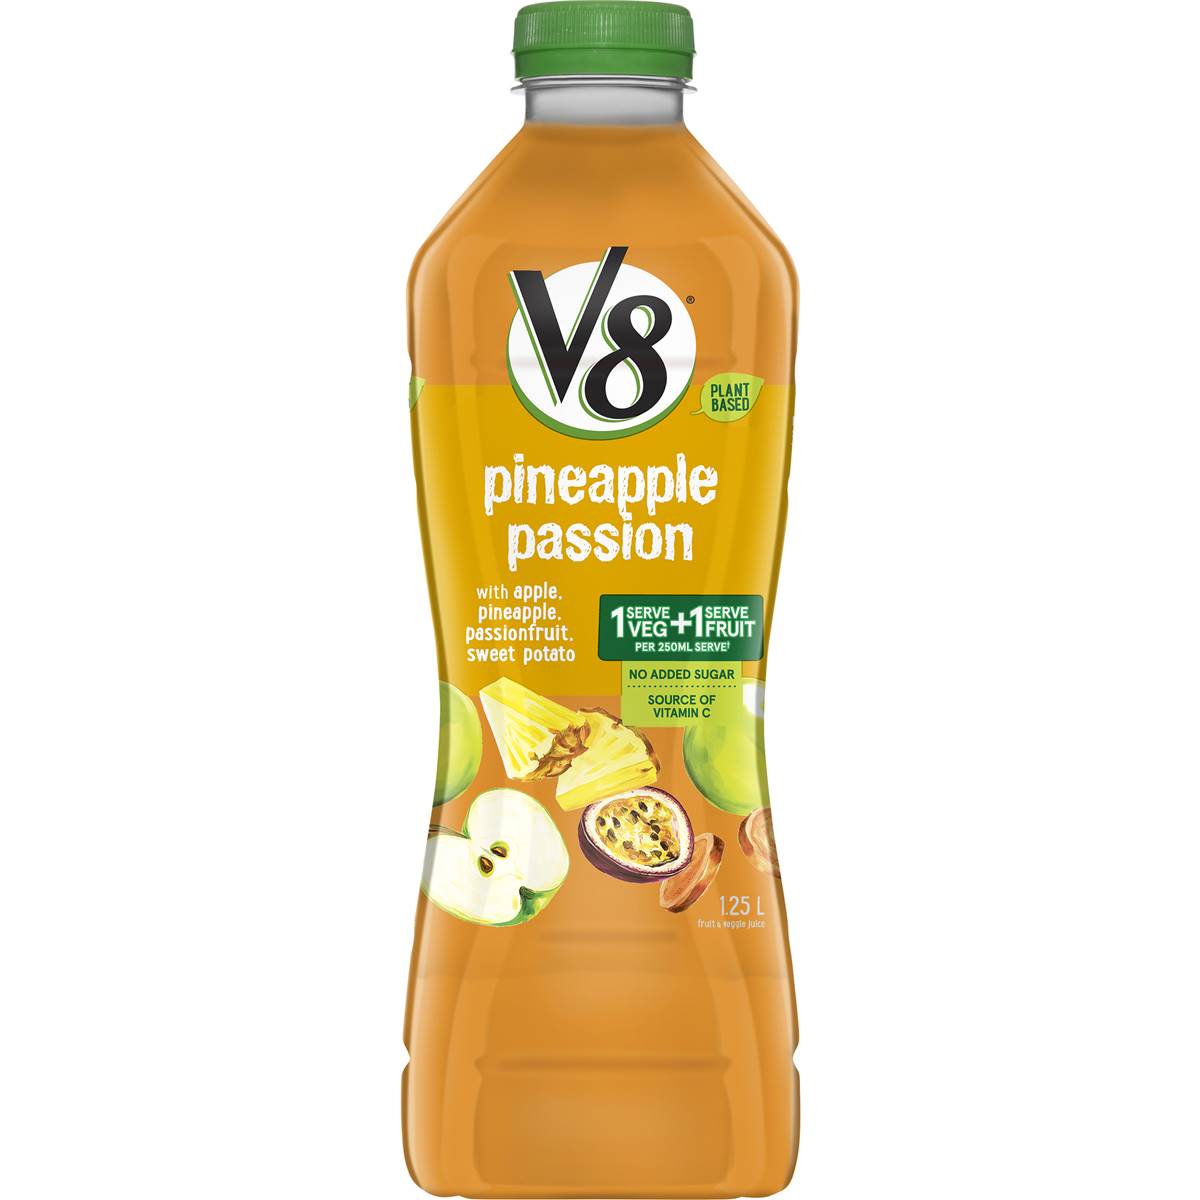 Calories in V8 Pineapple Passion Juice